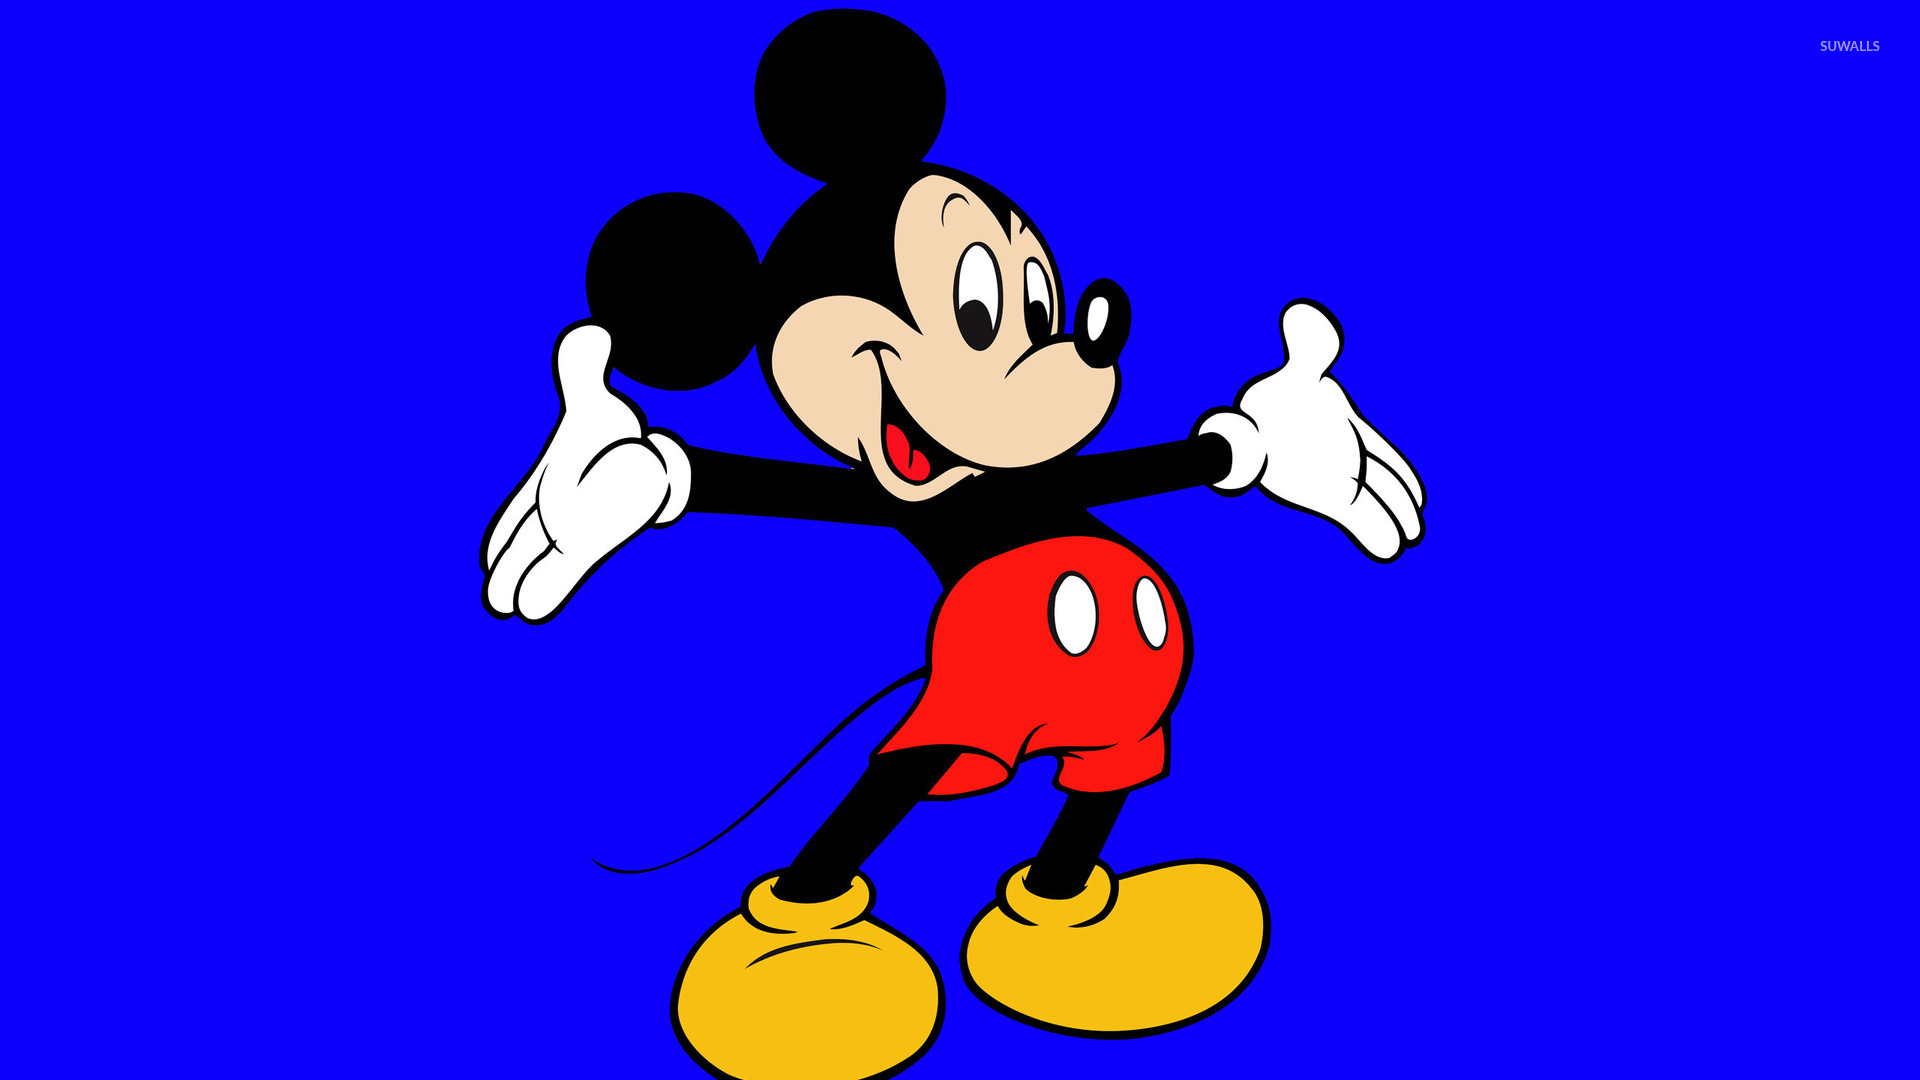 Mickey Mouse wallpaper  Cartoon wallpapers  10005